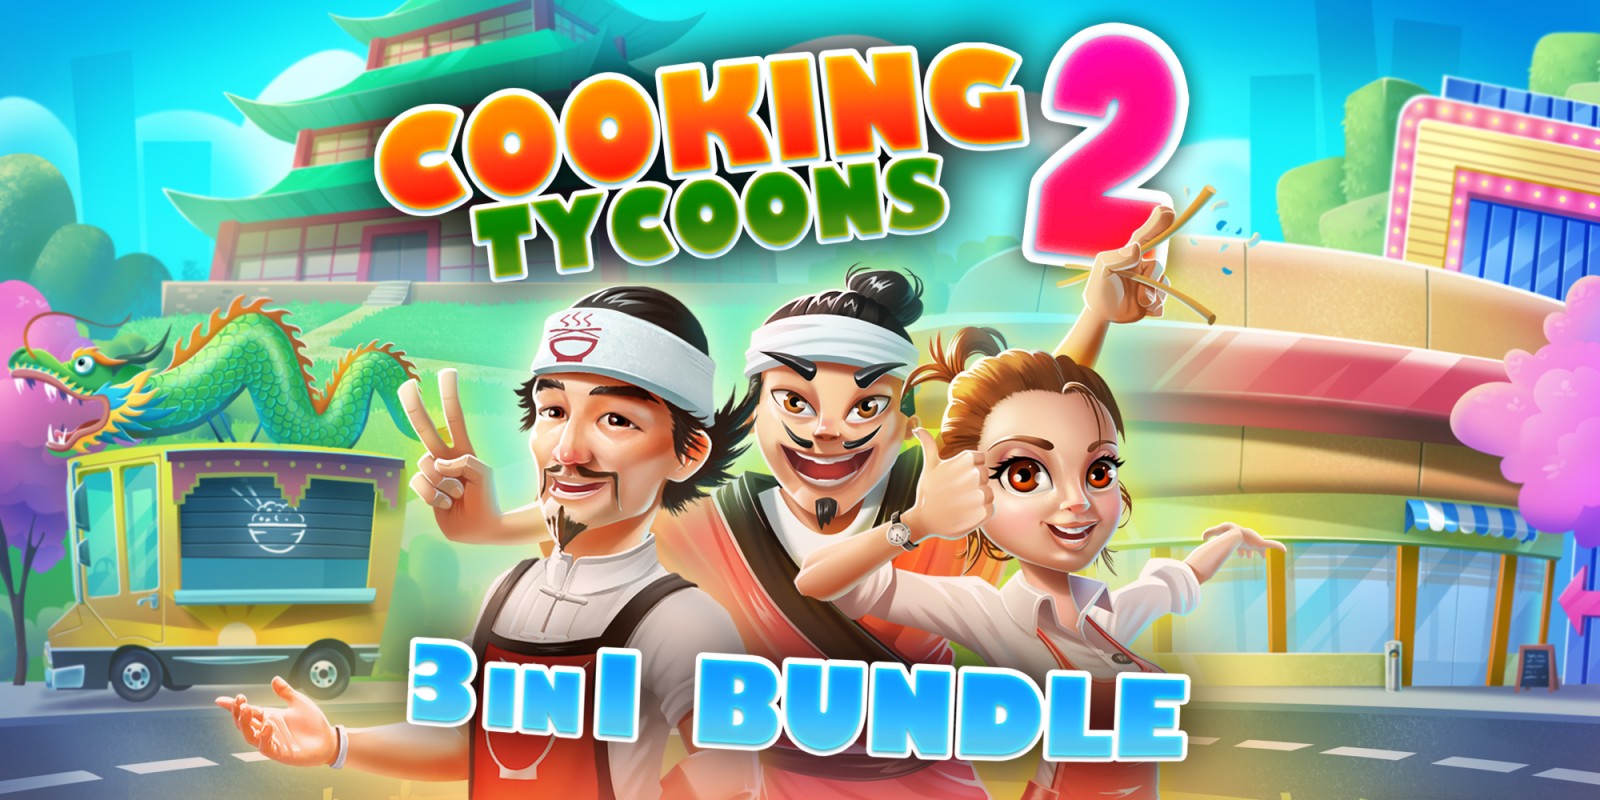 Cooking Tycoons 2 3 in 1 Bundle Nintendo Switch